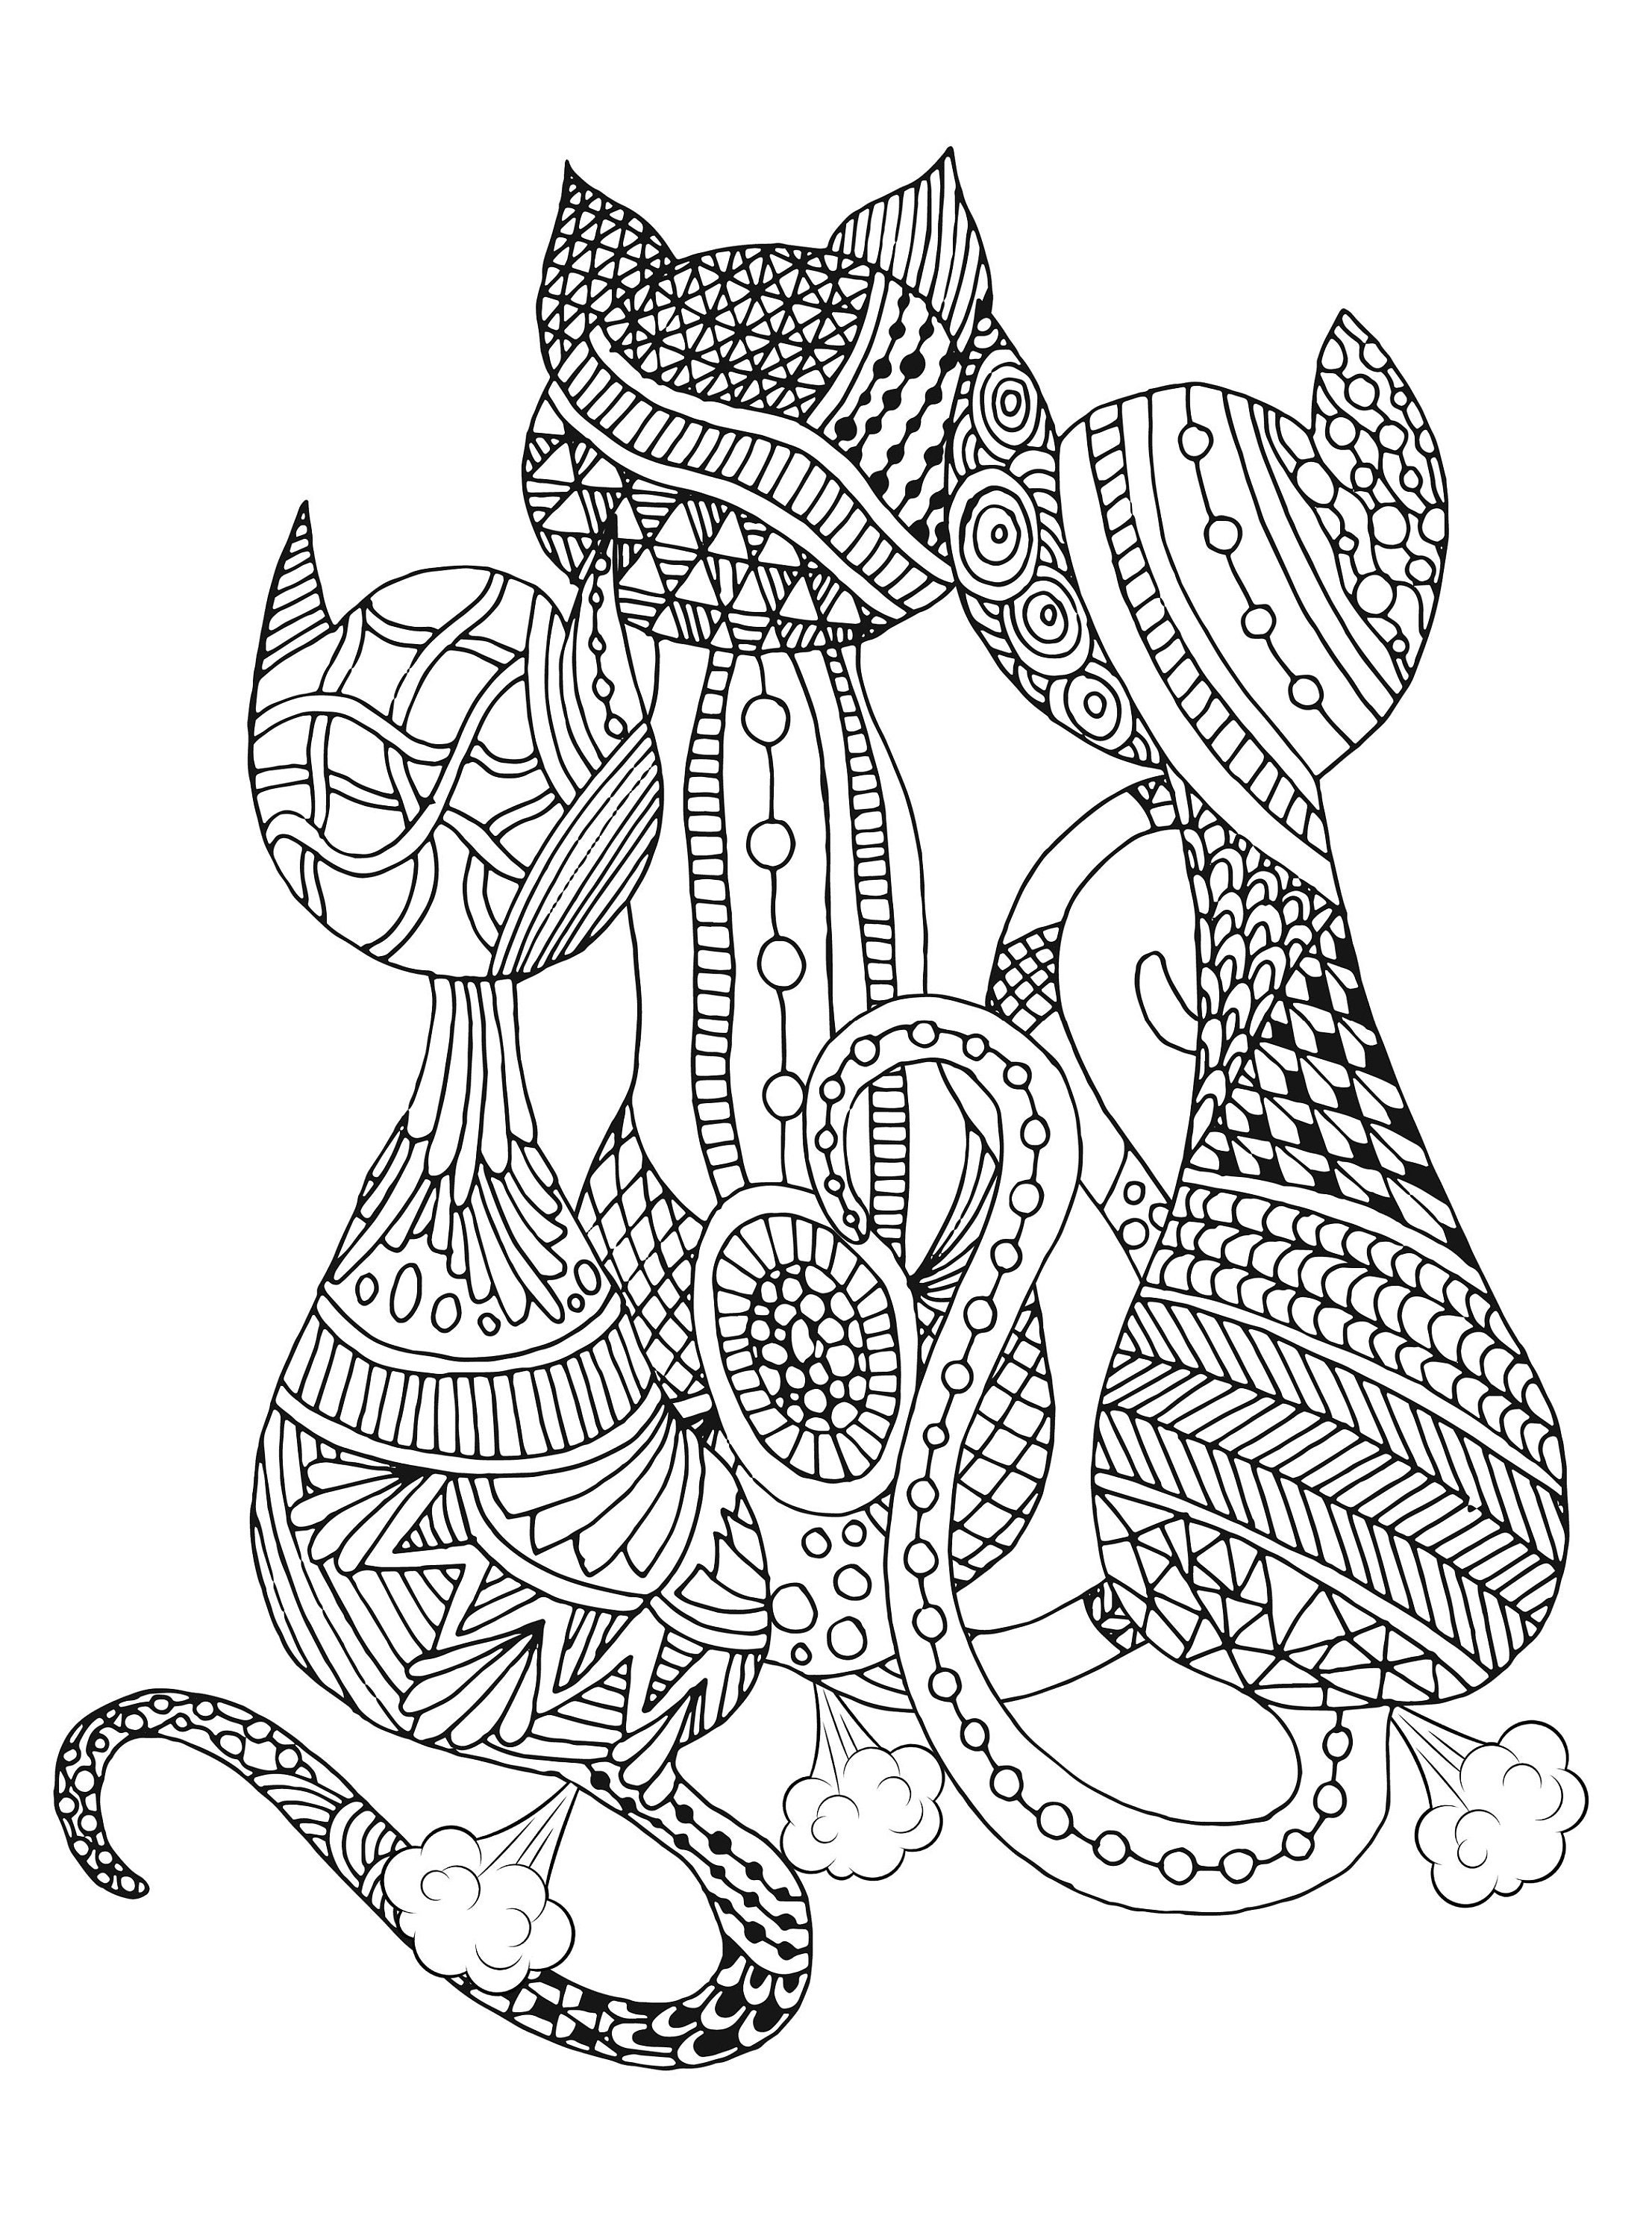 Lazy Cats Spiroglyphics Coloring Book: 40 Hidden Spiral Coloring Pages Of  Cats To Color And Have Fun | Stress Relief And Creativity Gifts For Boys